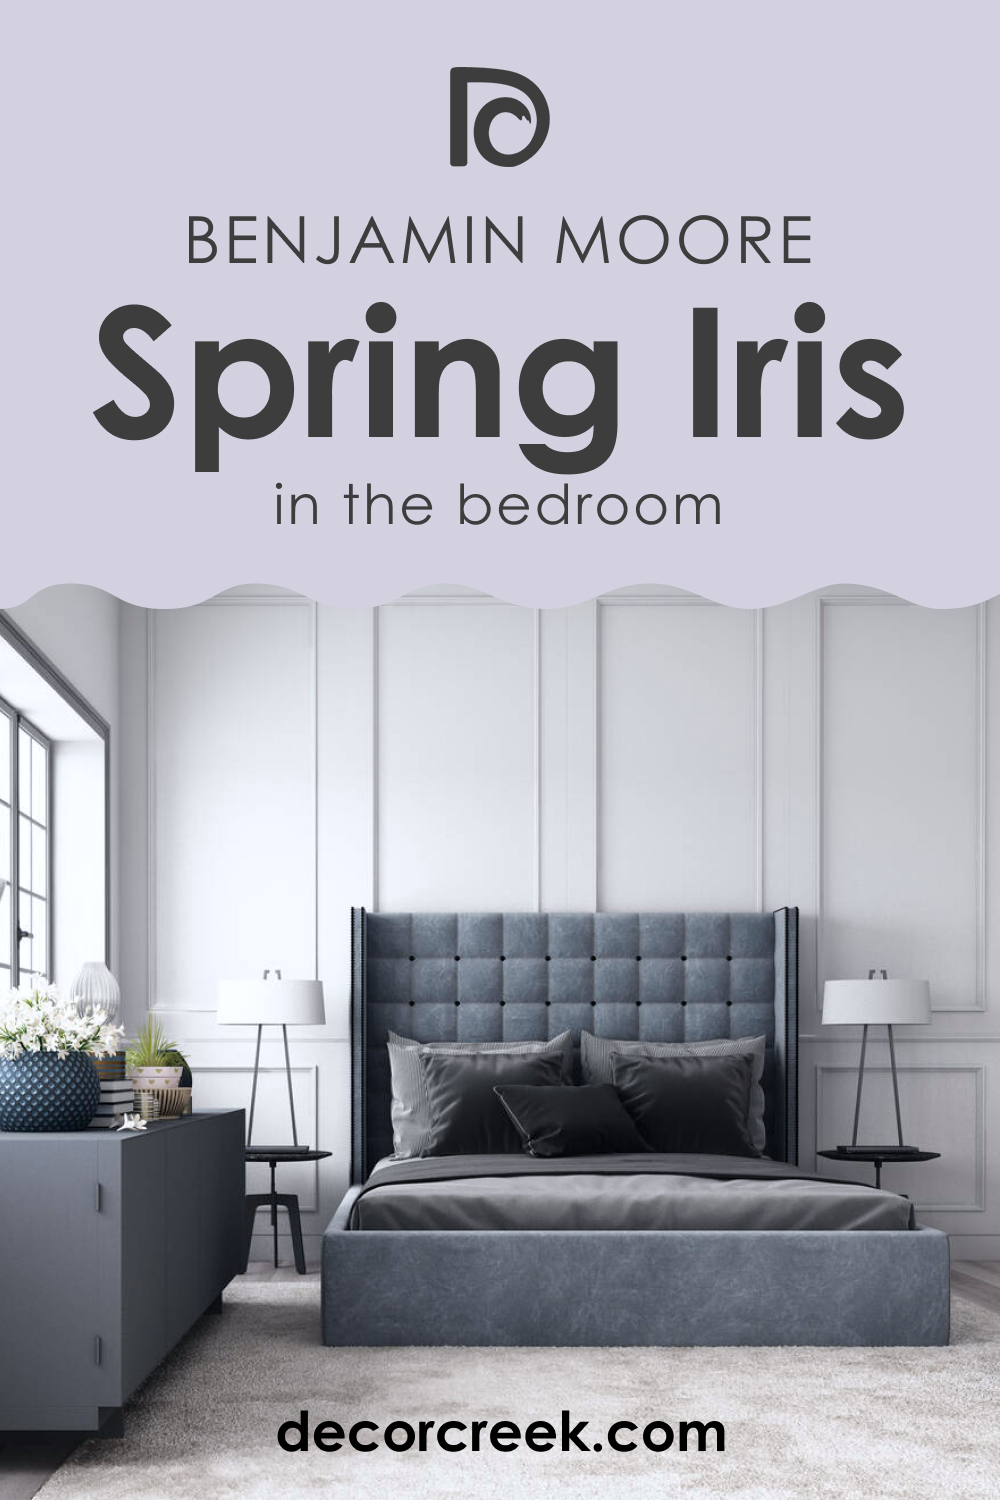 How to Use Spring Iris 1402 in the Bedroom?